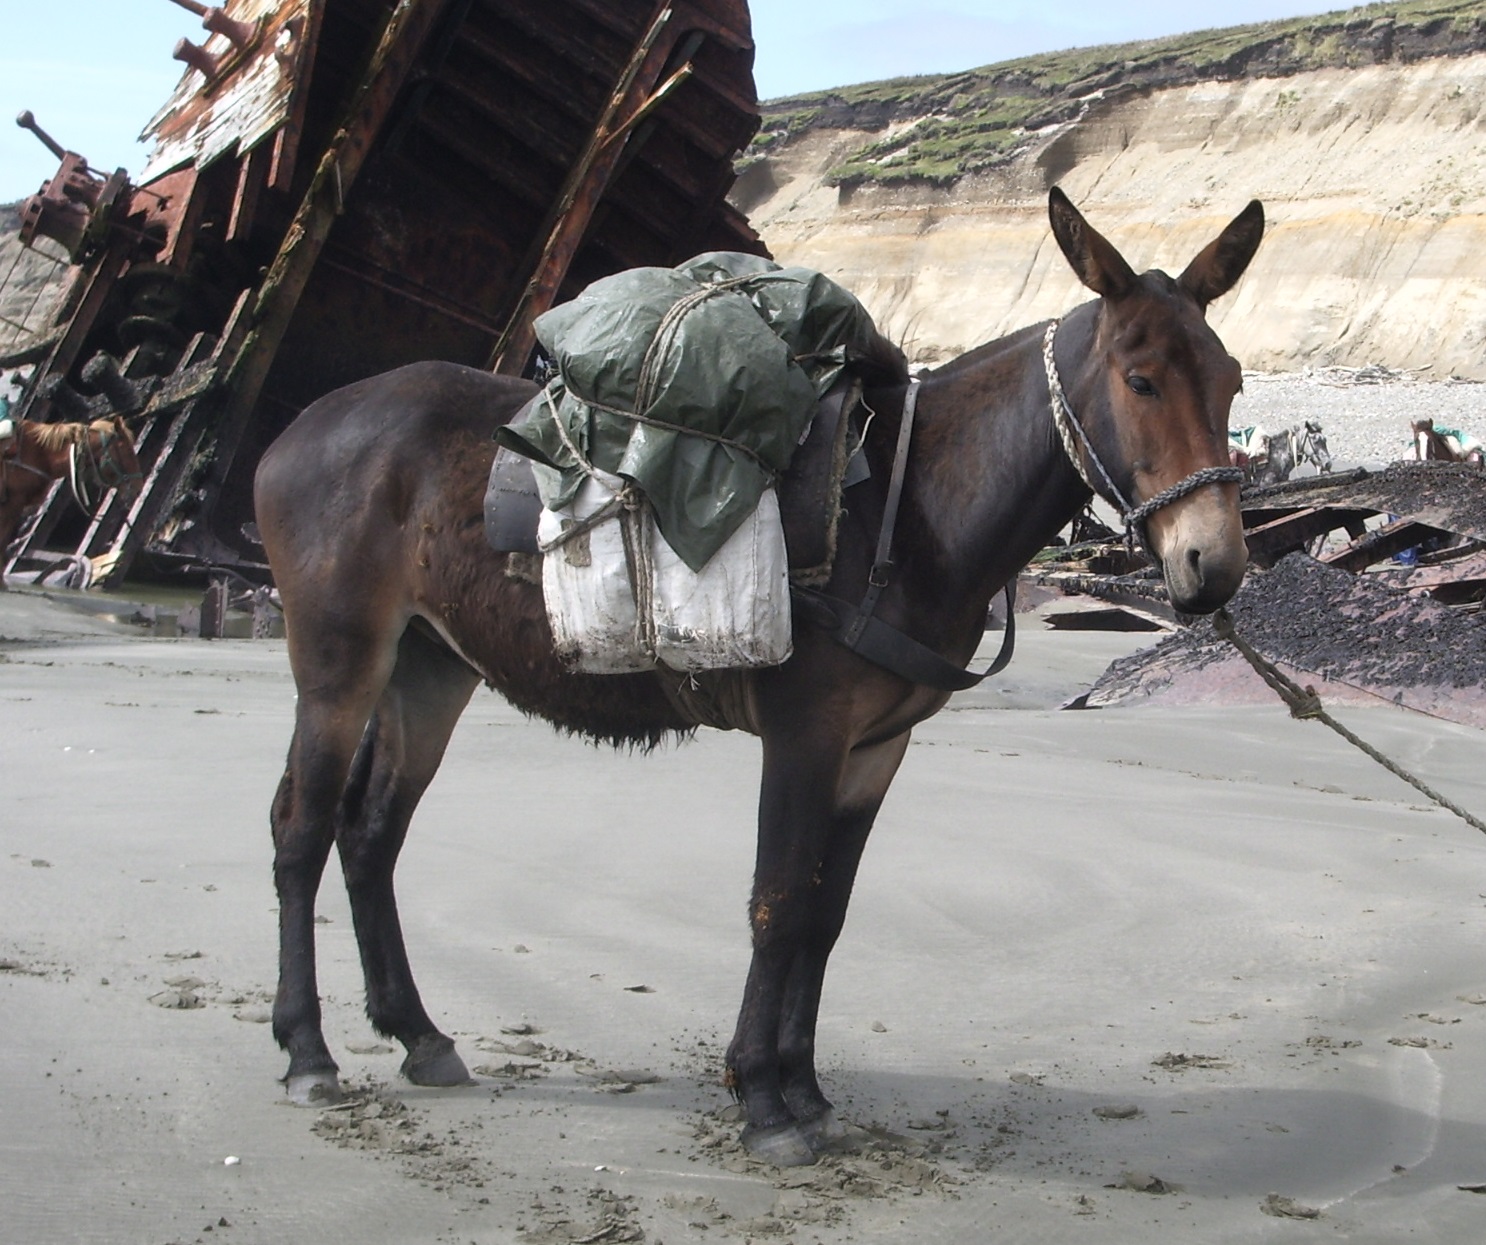 A pack mule, seemingly oblivious to the fact that it is not a species.